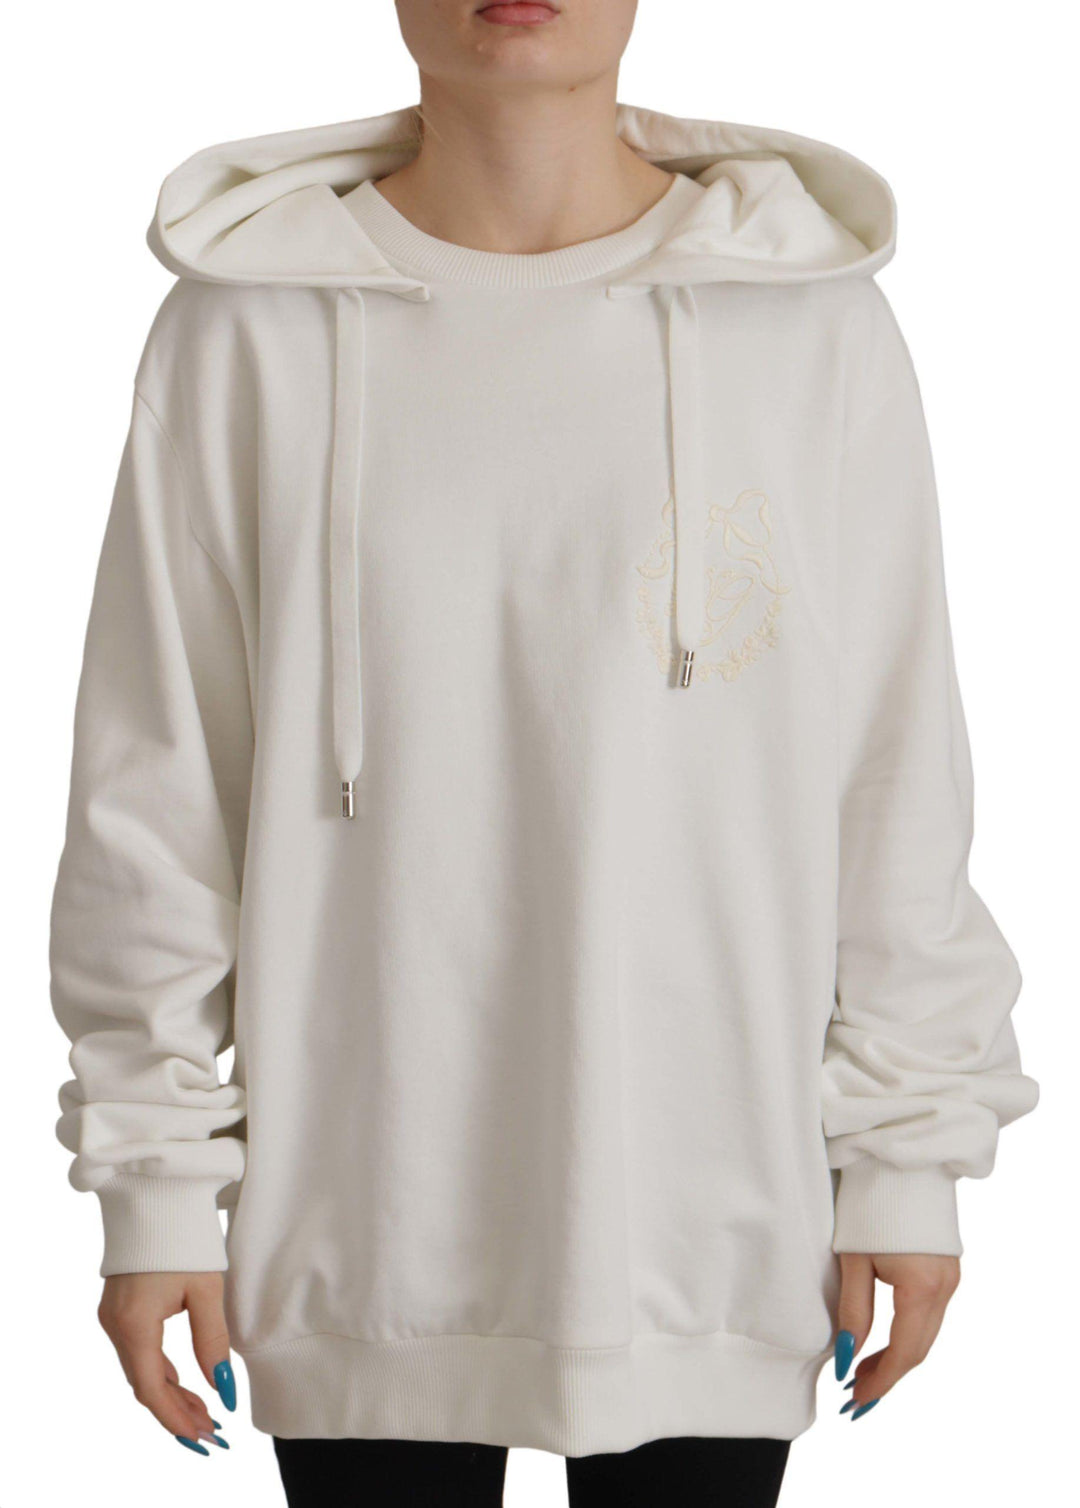 Dolce & Gabbana White Hoodie Pullover Embroidered Sweater - Ellie Belle